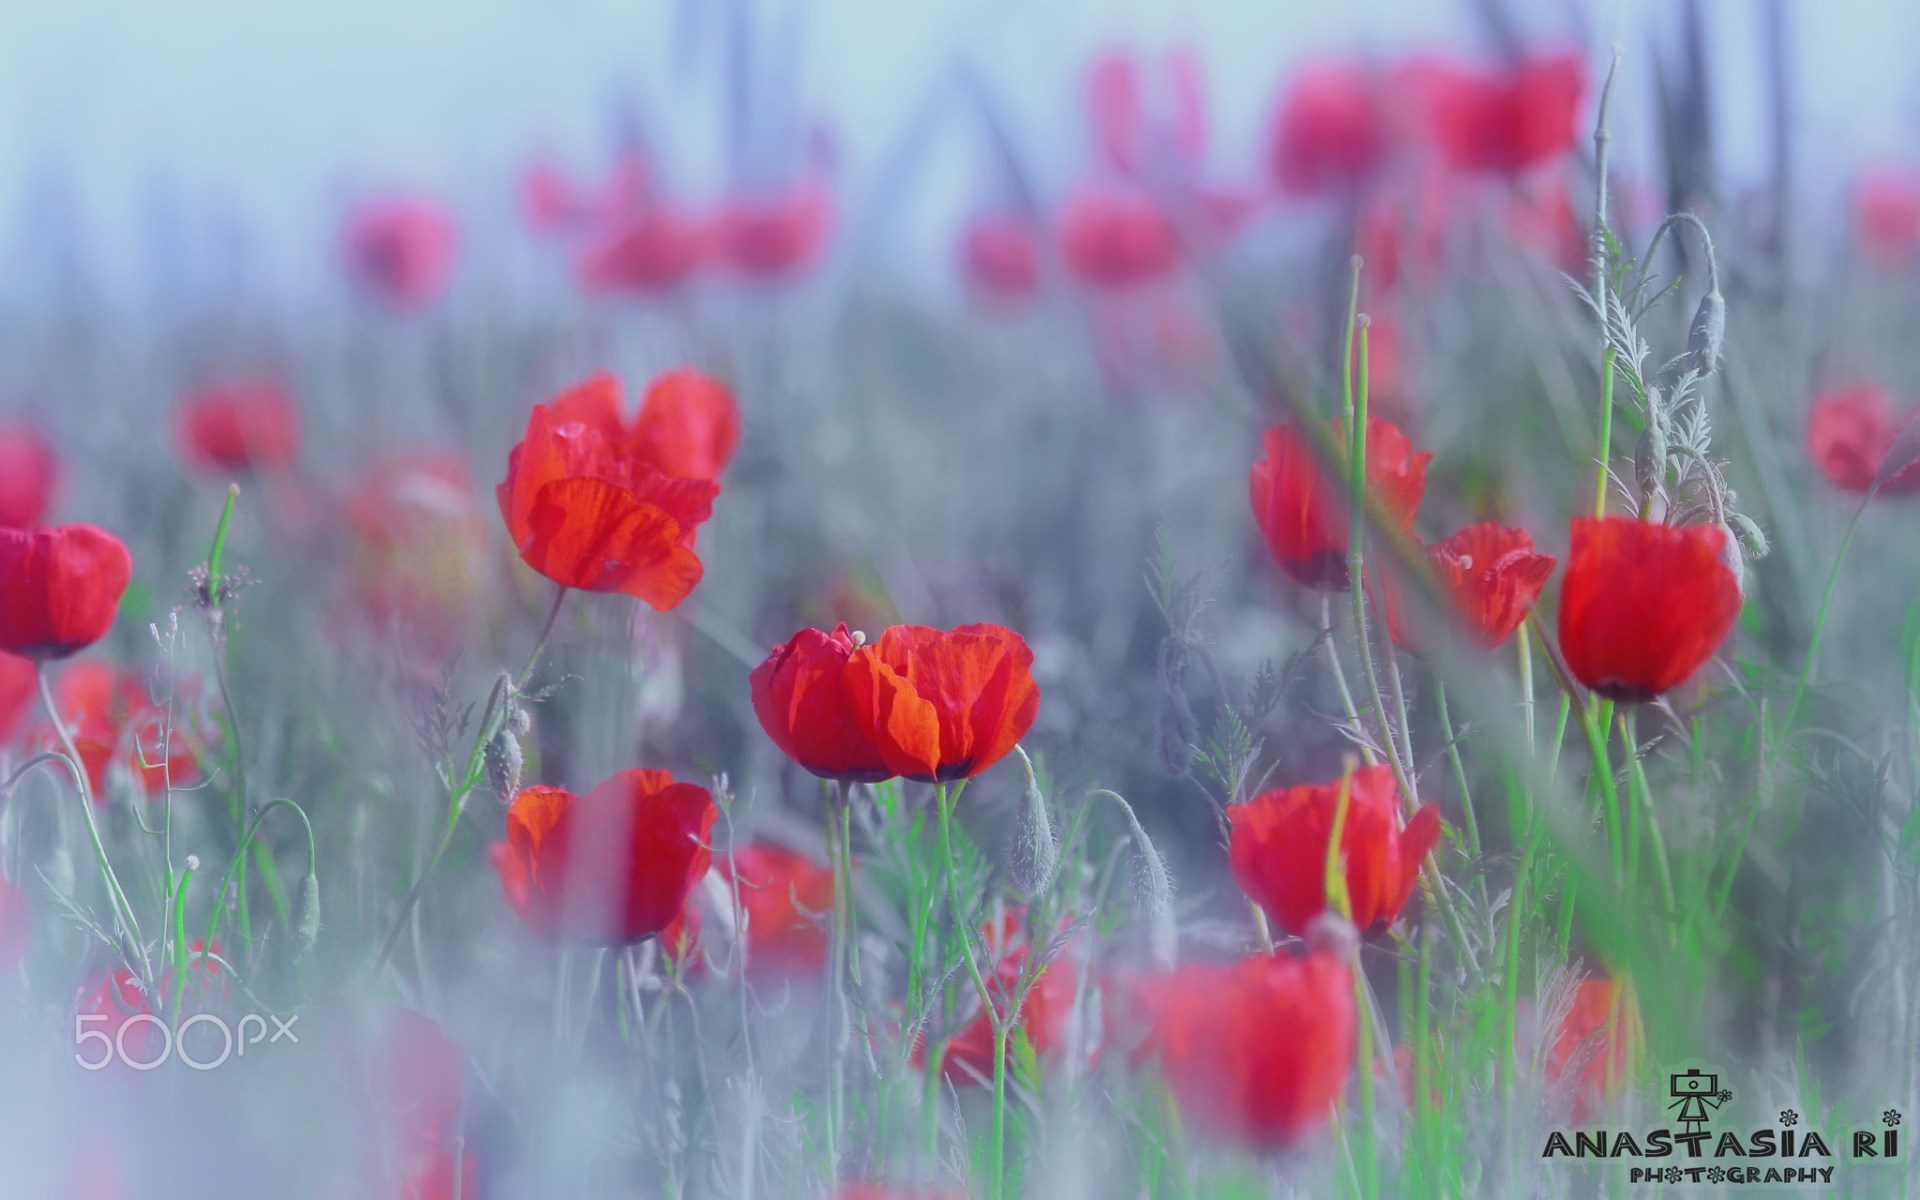 General 1920x1200 flowers plants red flowers 500px